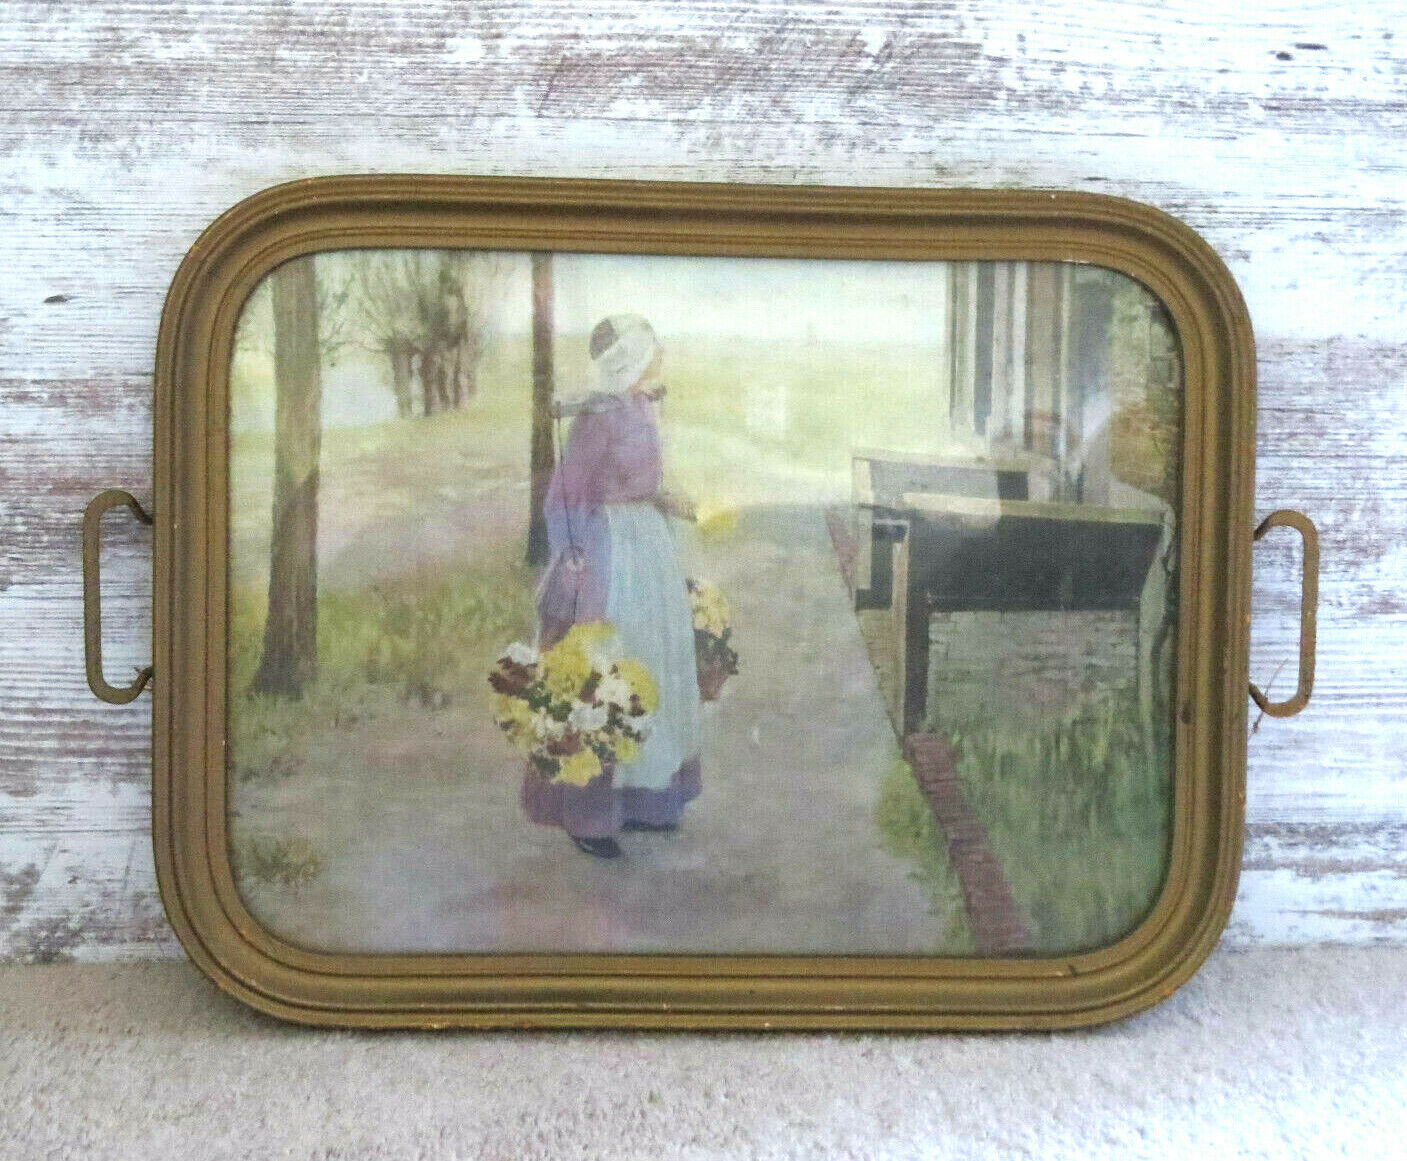 Grubby Primitive Old Wood Framed Picture Tray w Handles Dutch Woman w Flowers